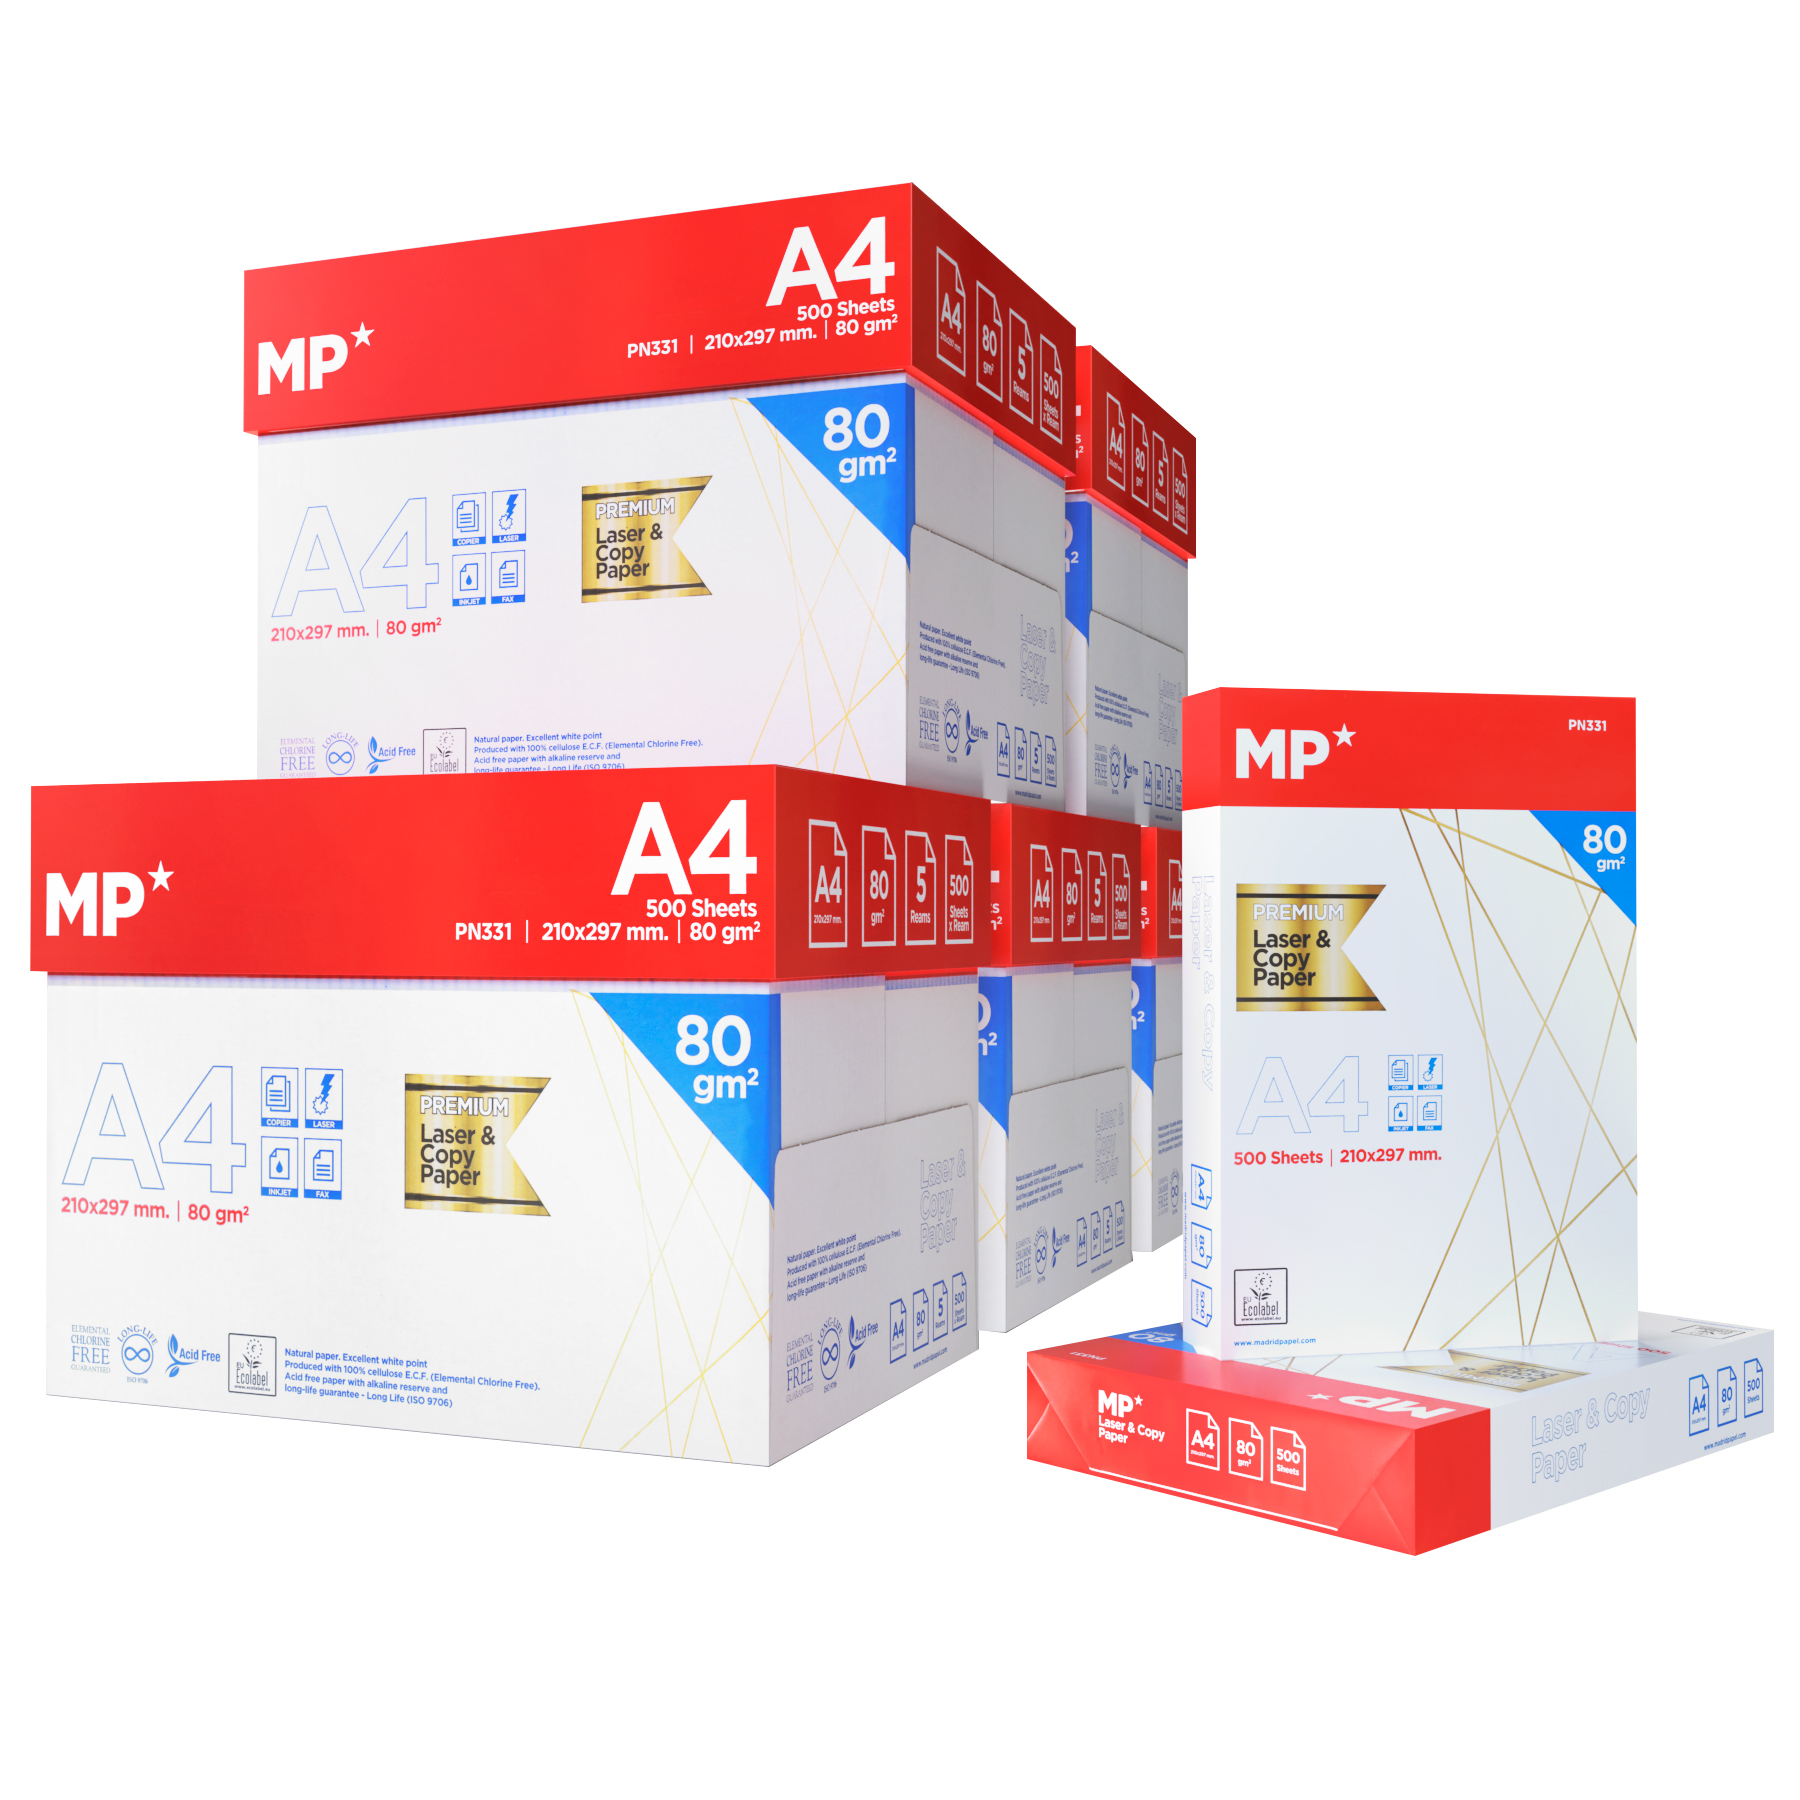 PN331 A4 MULTIFUNCTIONAL WHITE COPY PAPER 80 g/m²